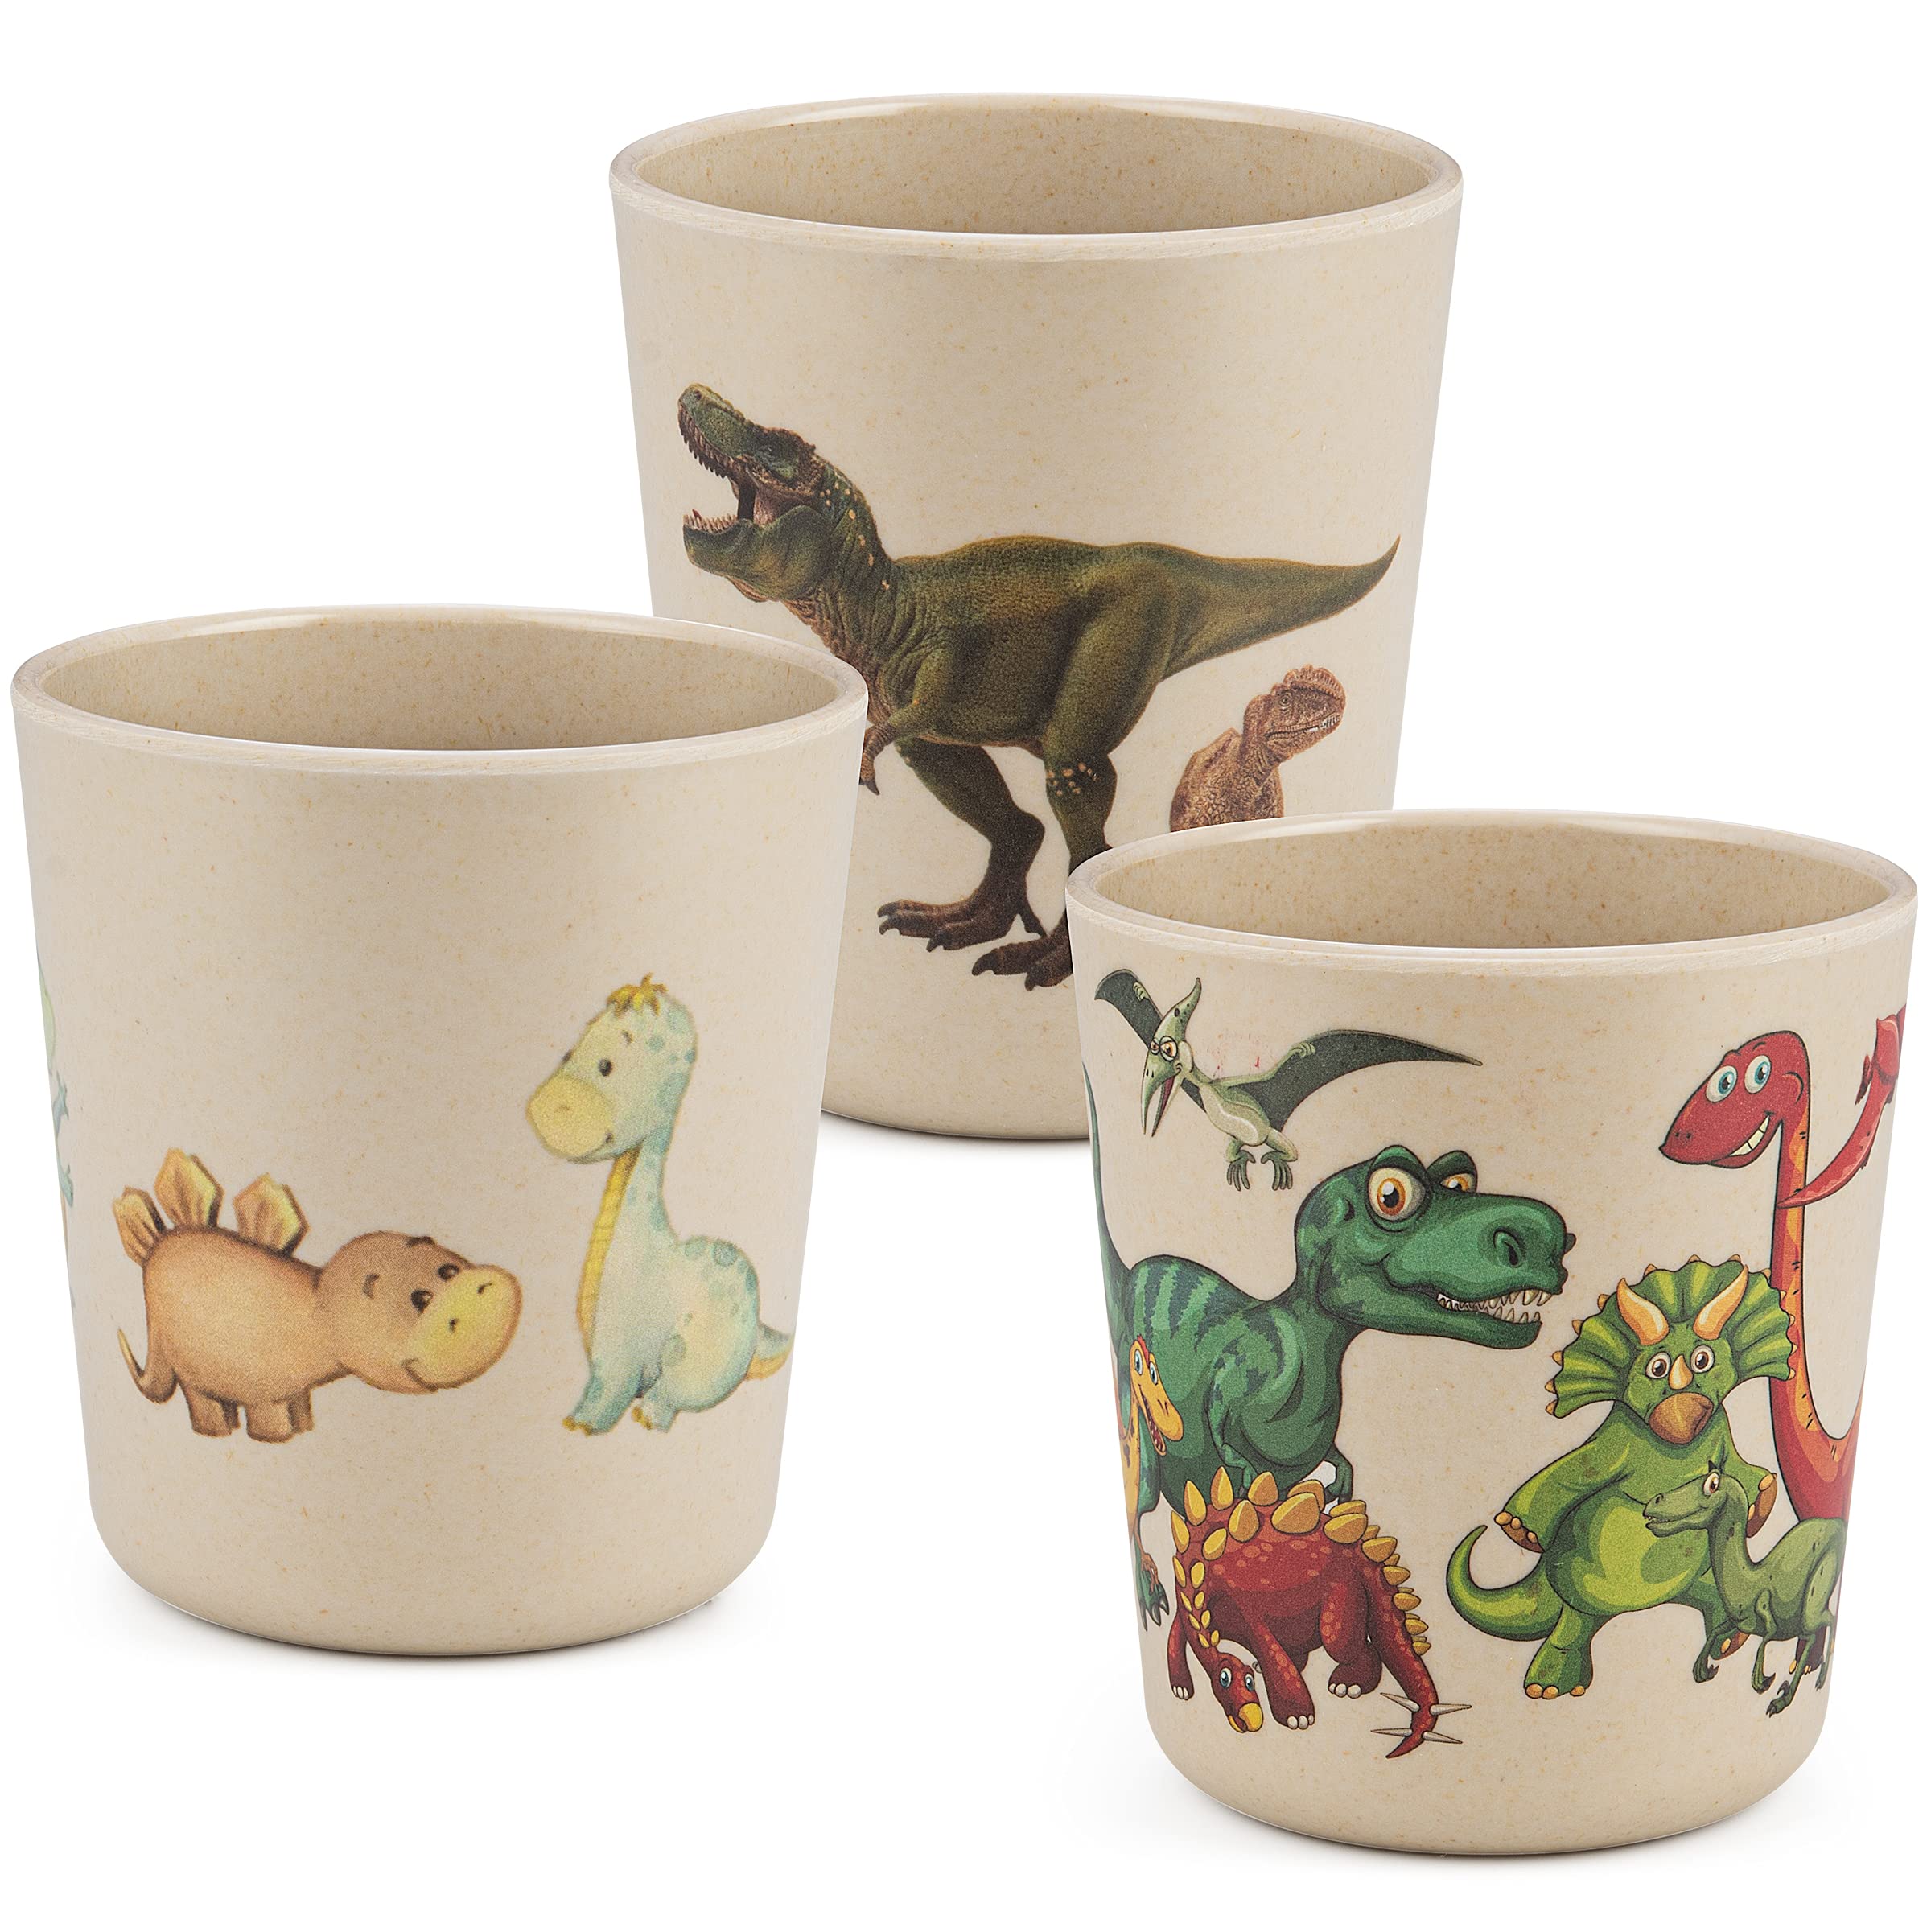 Bamboo Cups for Kids - Set of 3 Fun Dinosaur Cups - 8 oz Bamboo